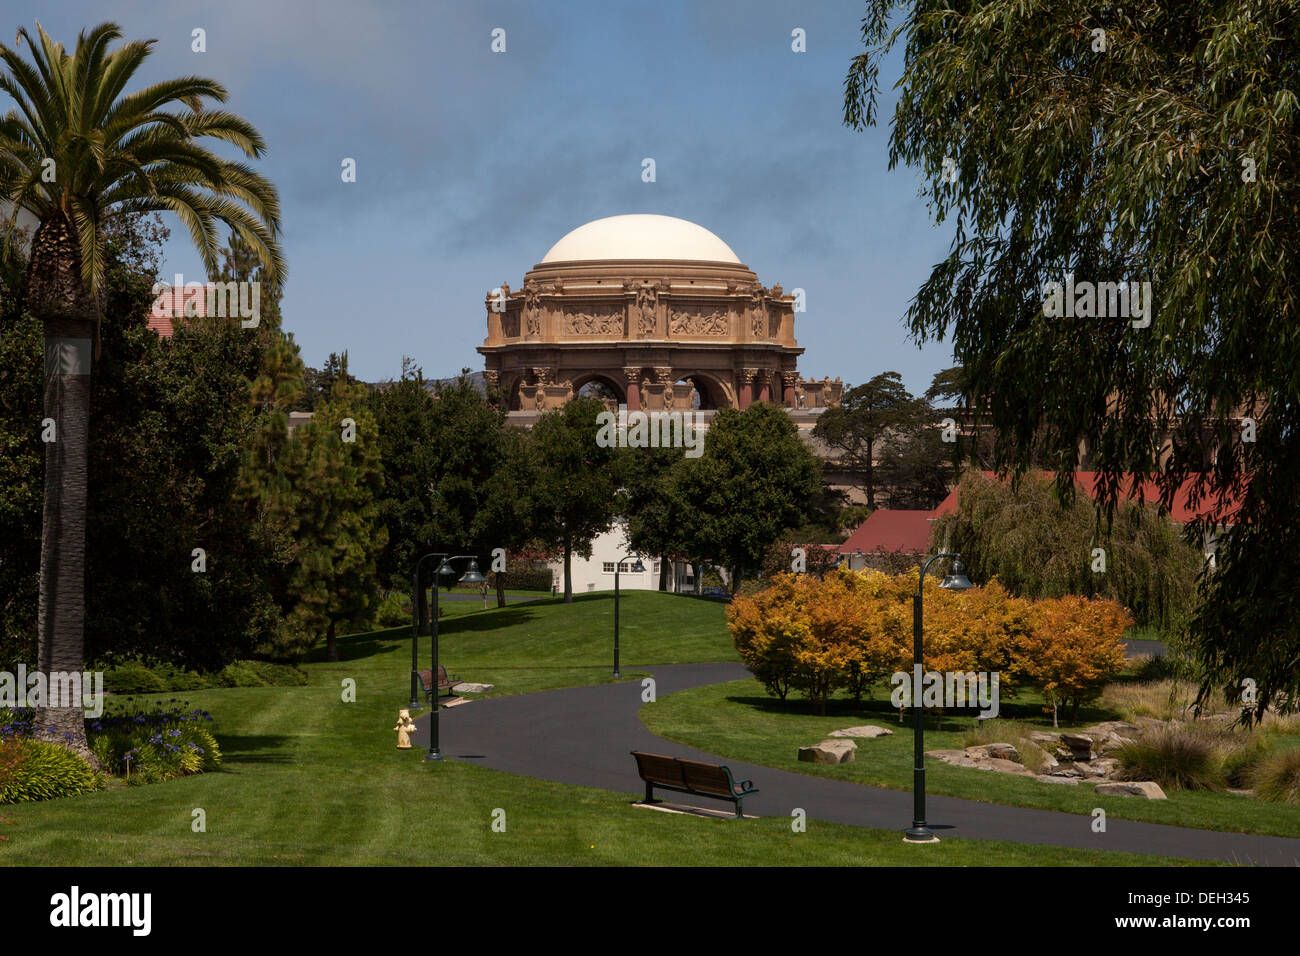 Palace of Fine Arts dome viewed from Lucas Film Digital Art Center, San Francisco, California. Stock Photo